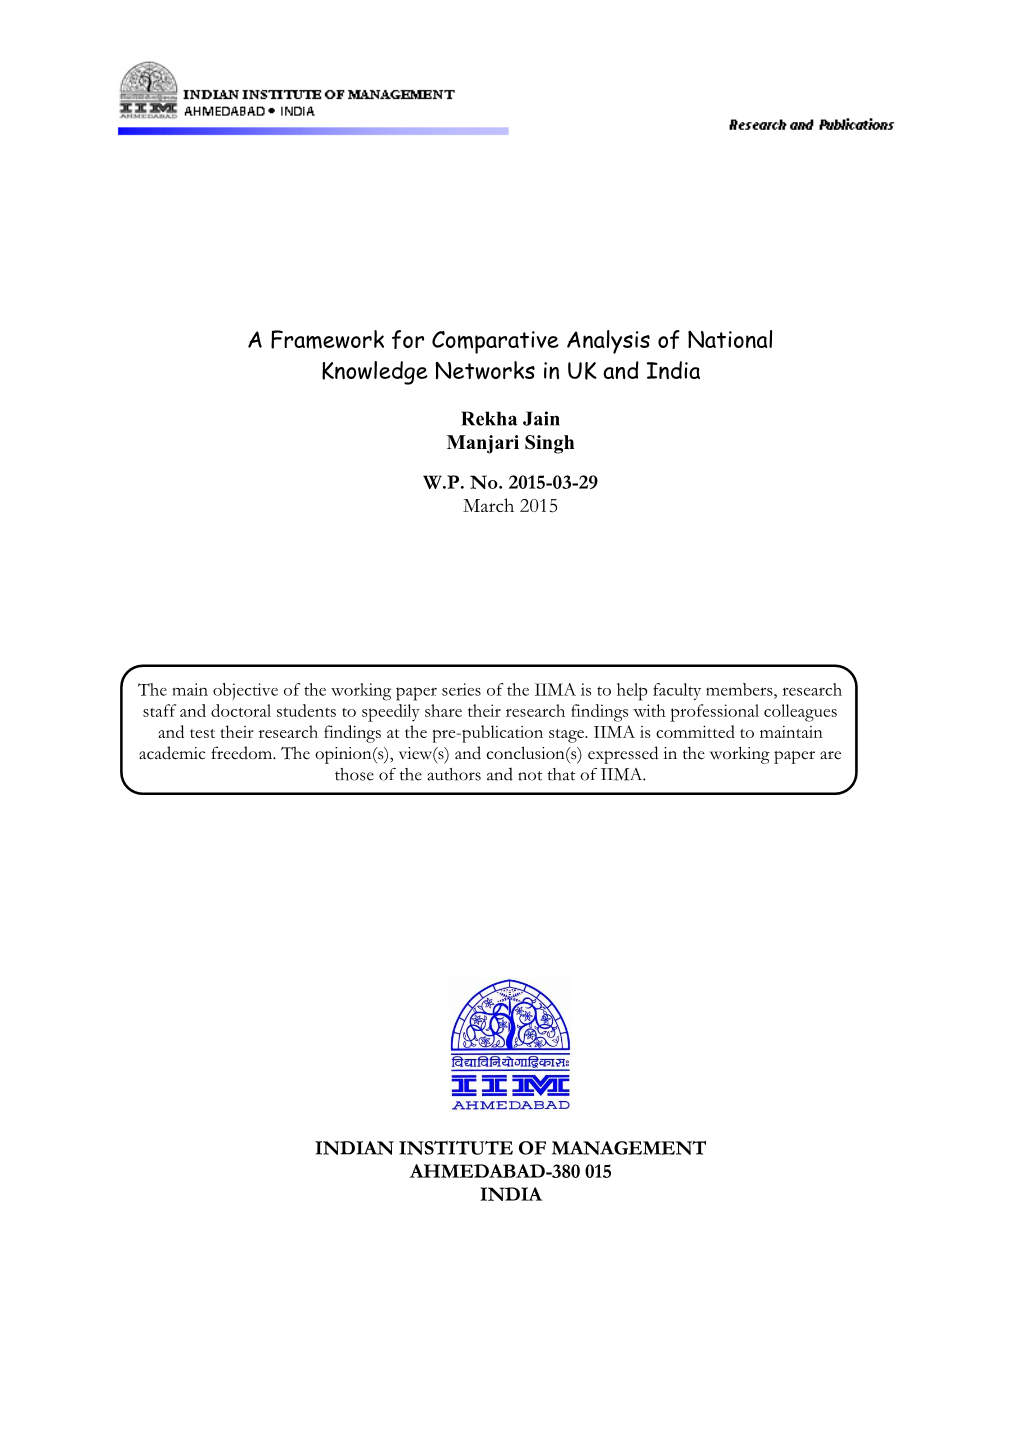 A Framework for Comparative Analysis of National Knowledge Networks in UK and India